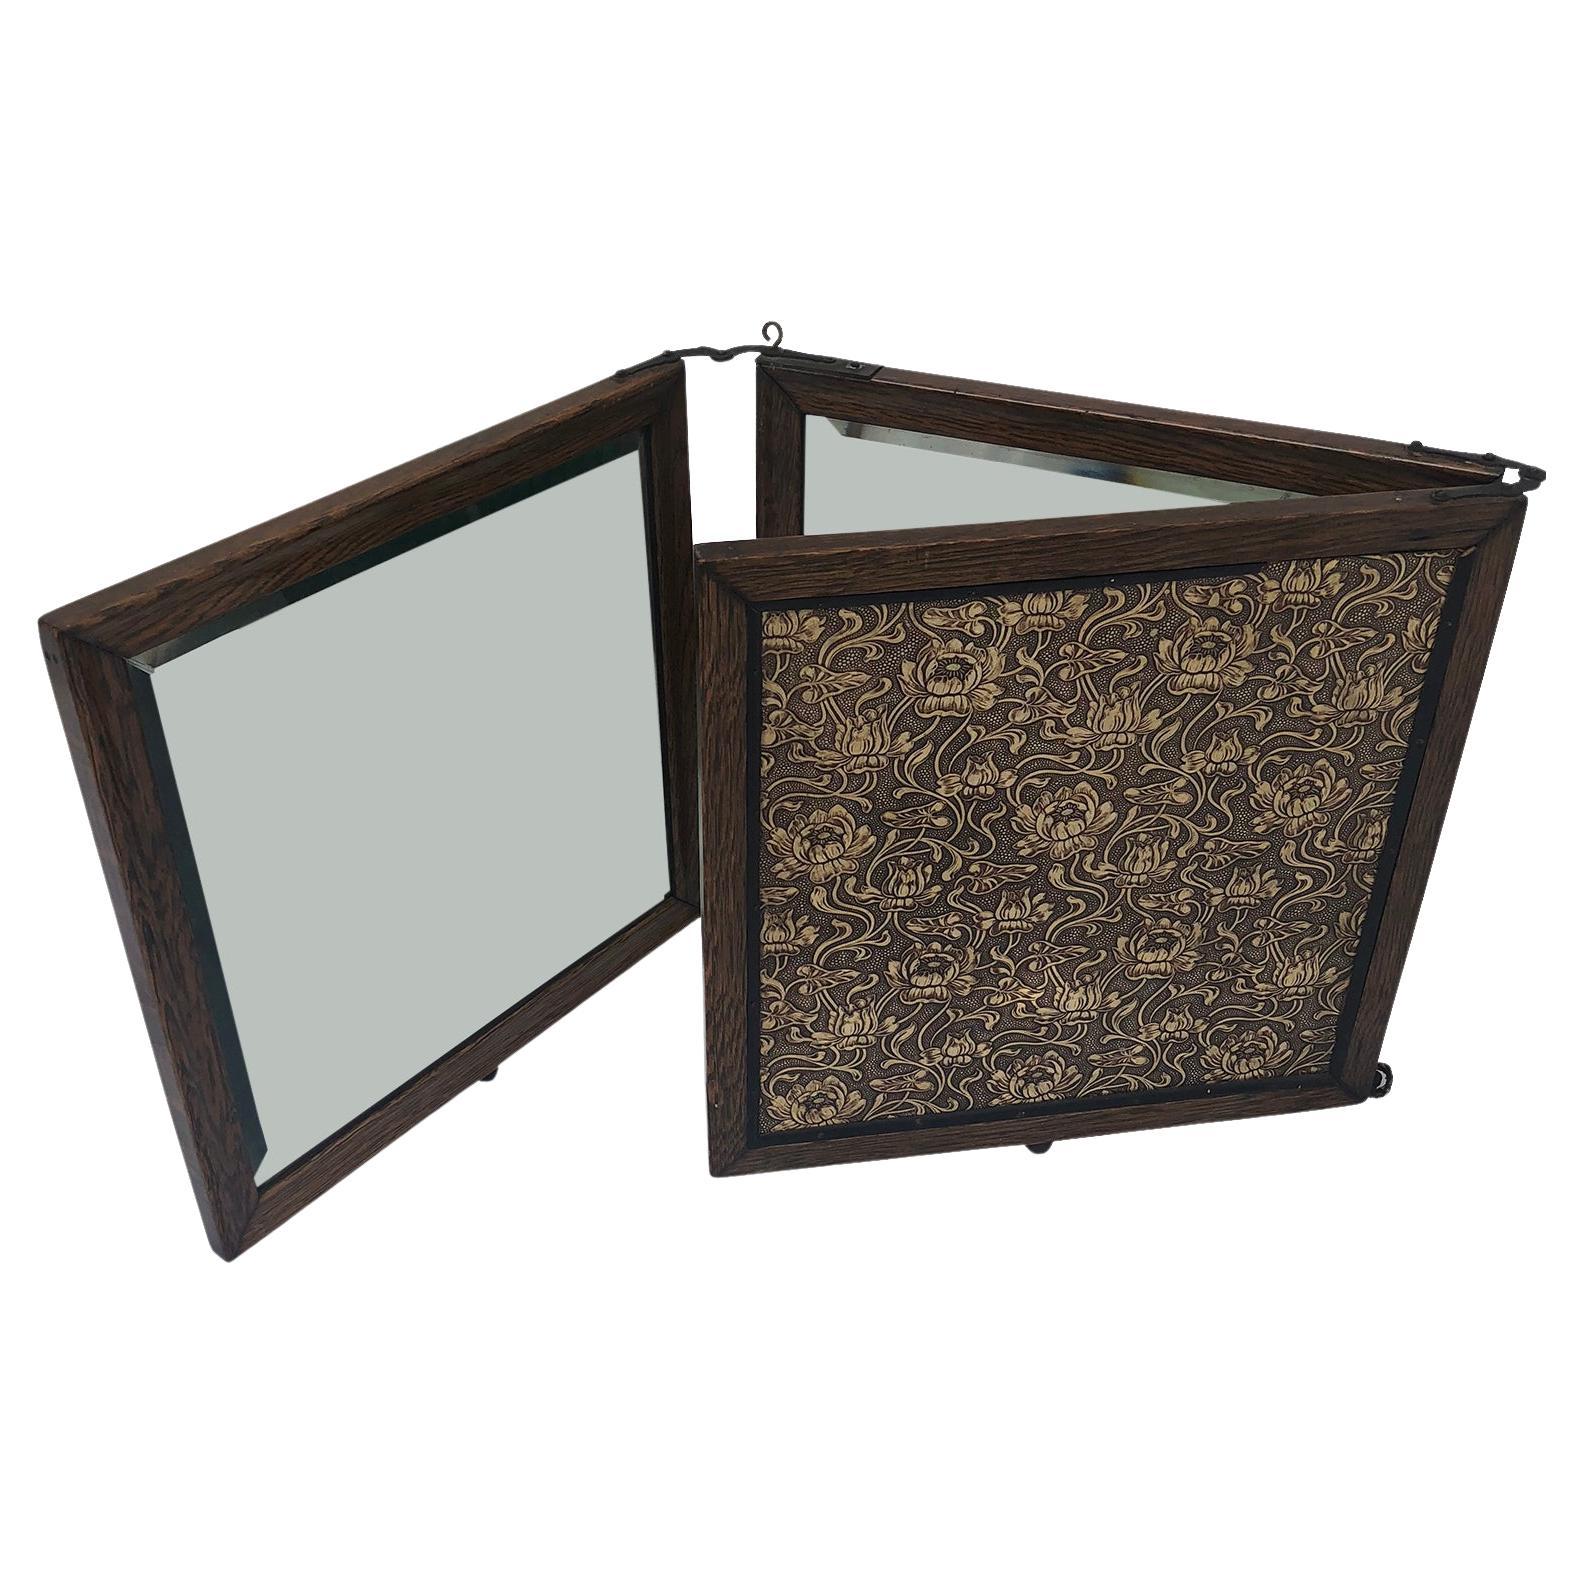 English Tri-Fold travel vanity or dresser mirror with beveled glass.